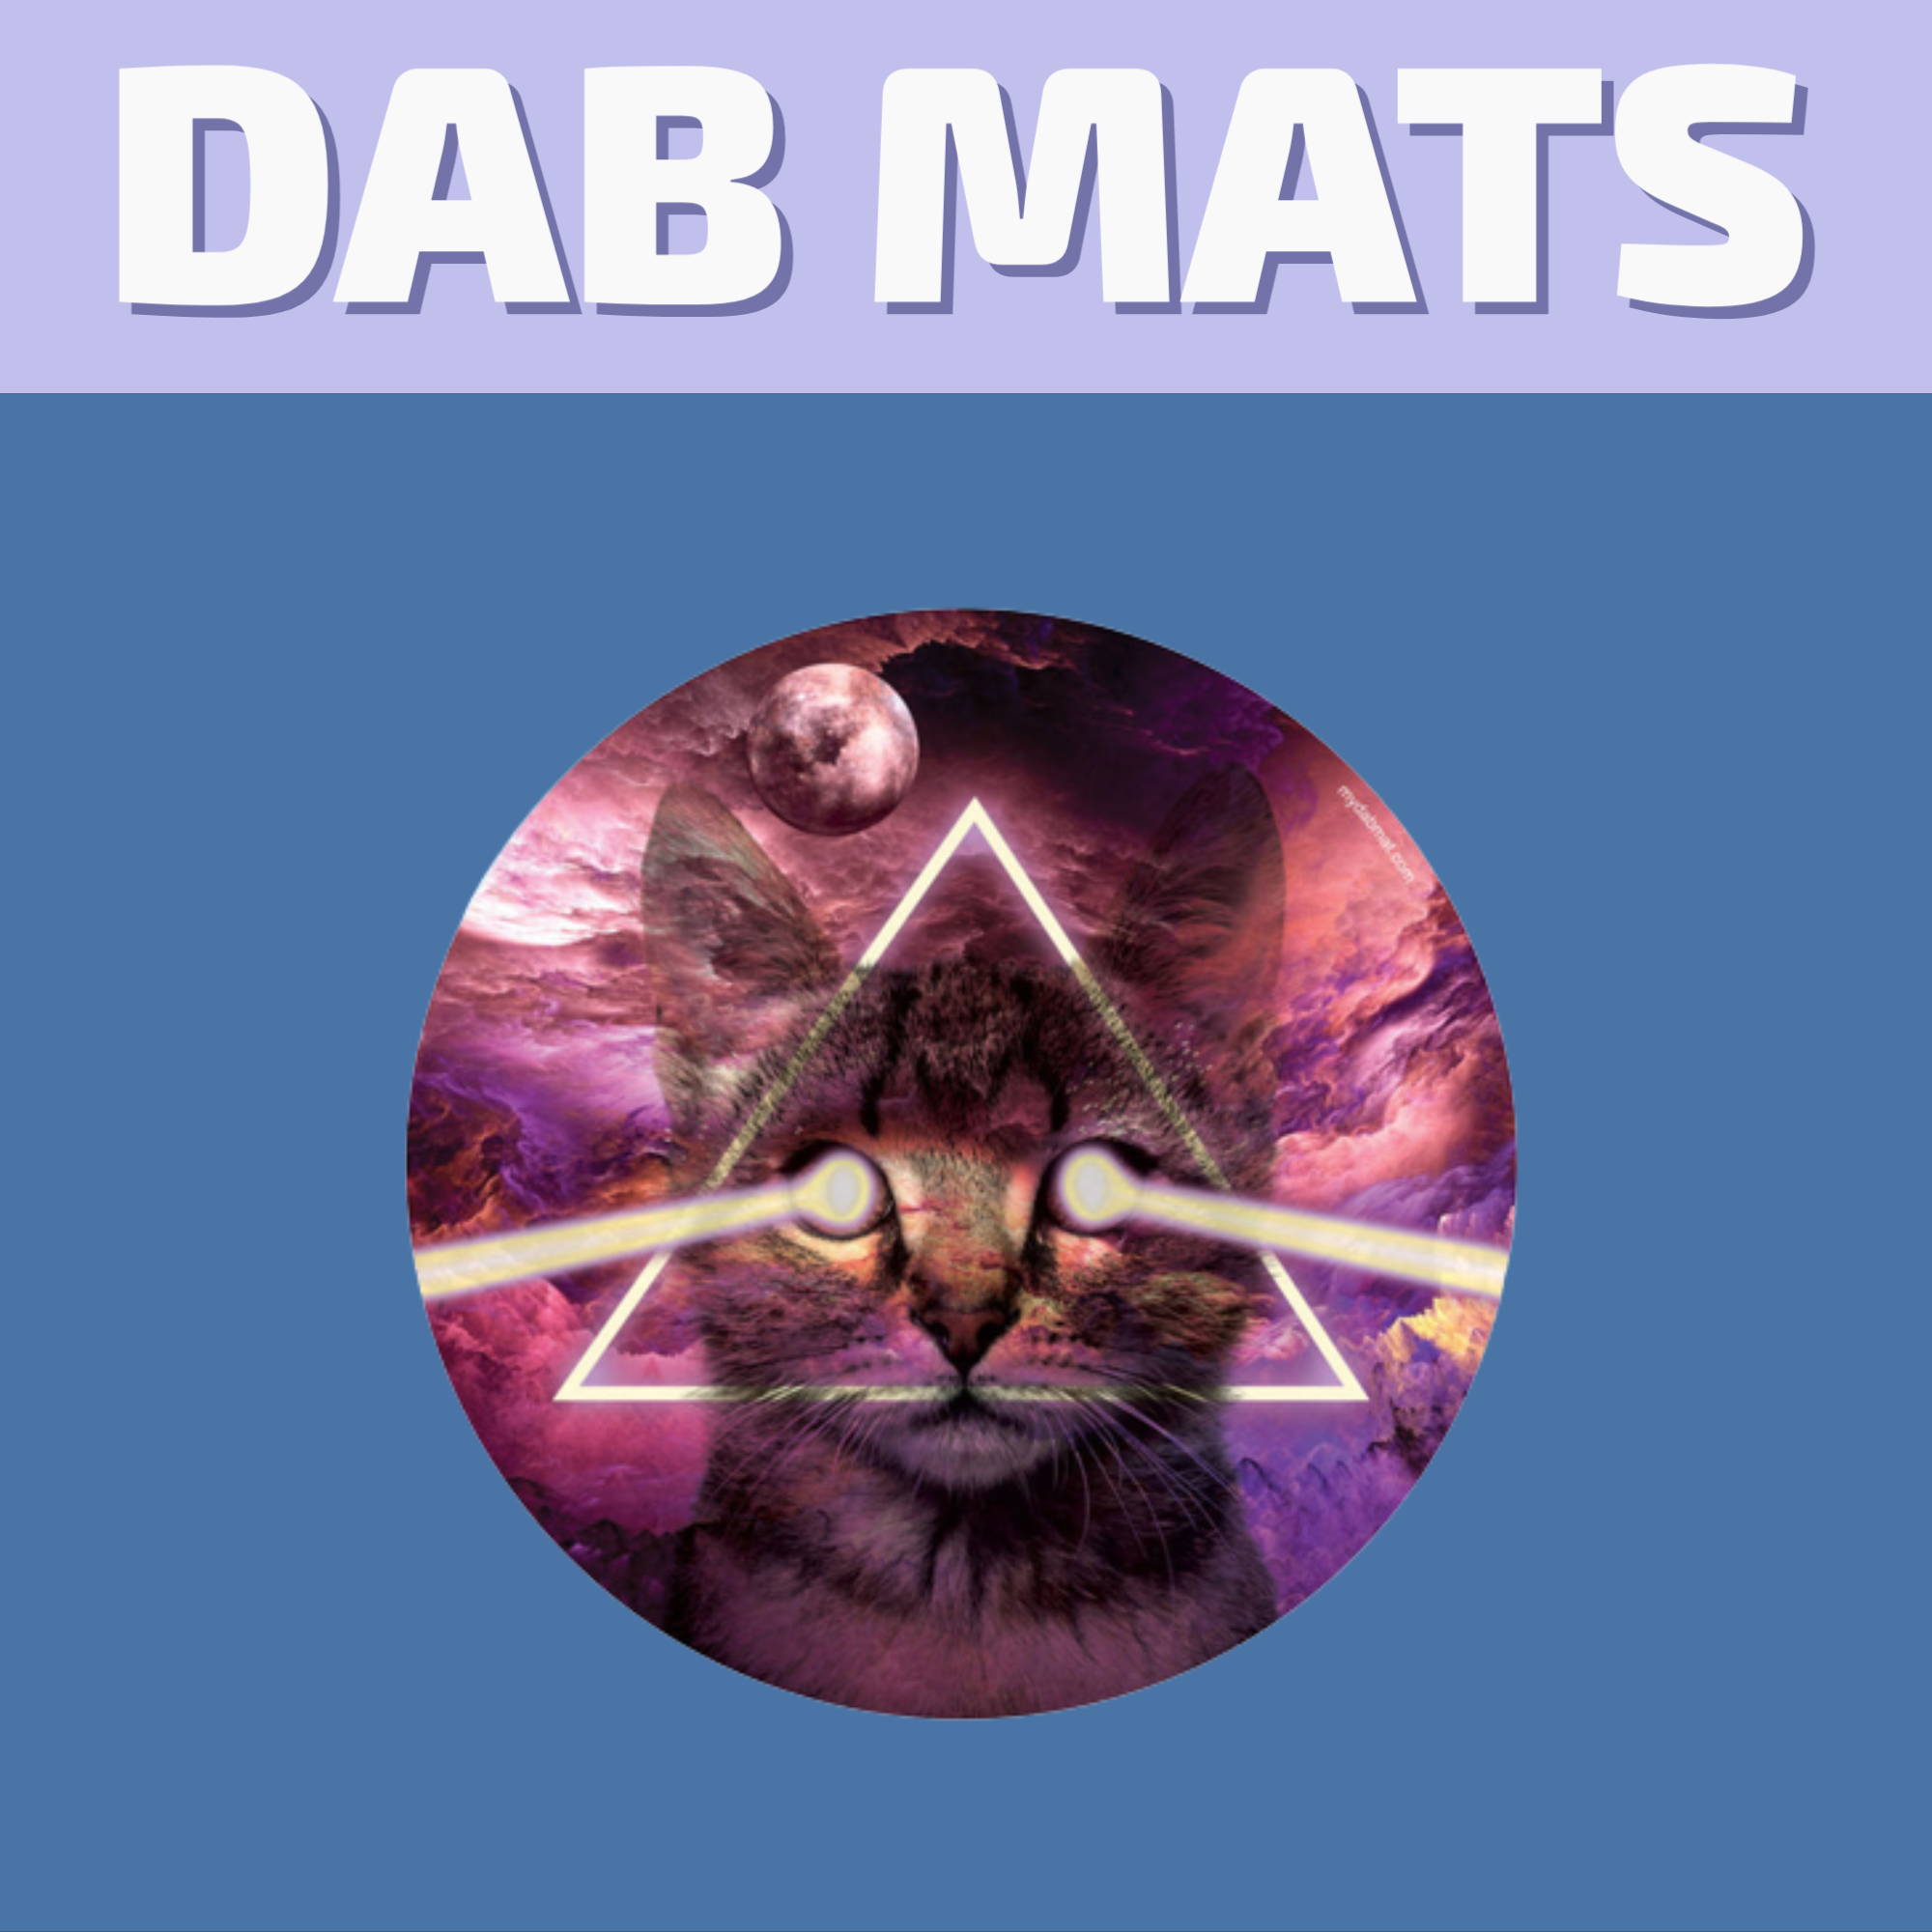 Buy Dab Pads and Dab Mats online for same day delivery in Winnipeg or visit our dispensary on 580 Academy Road. 